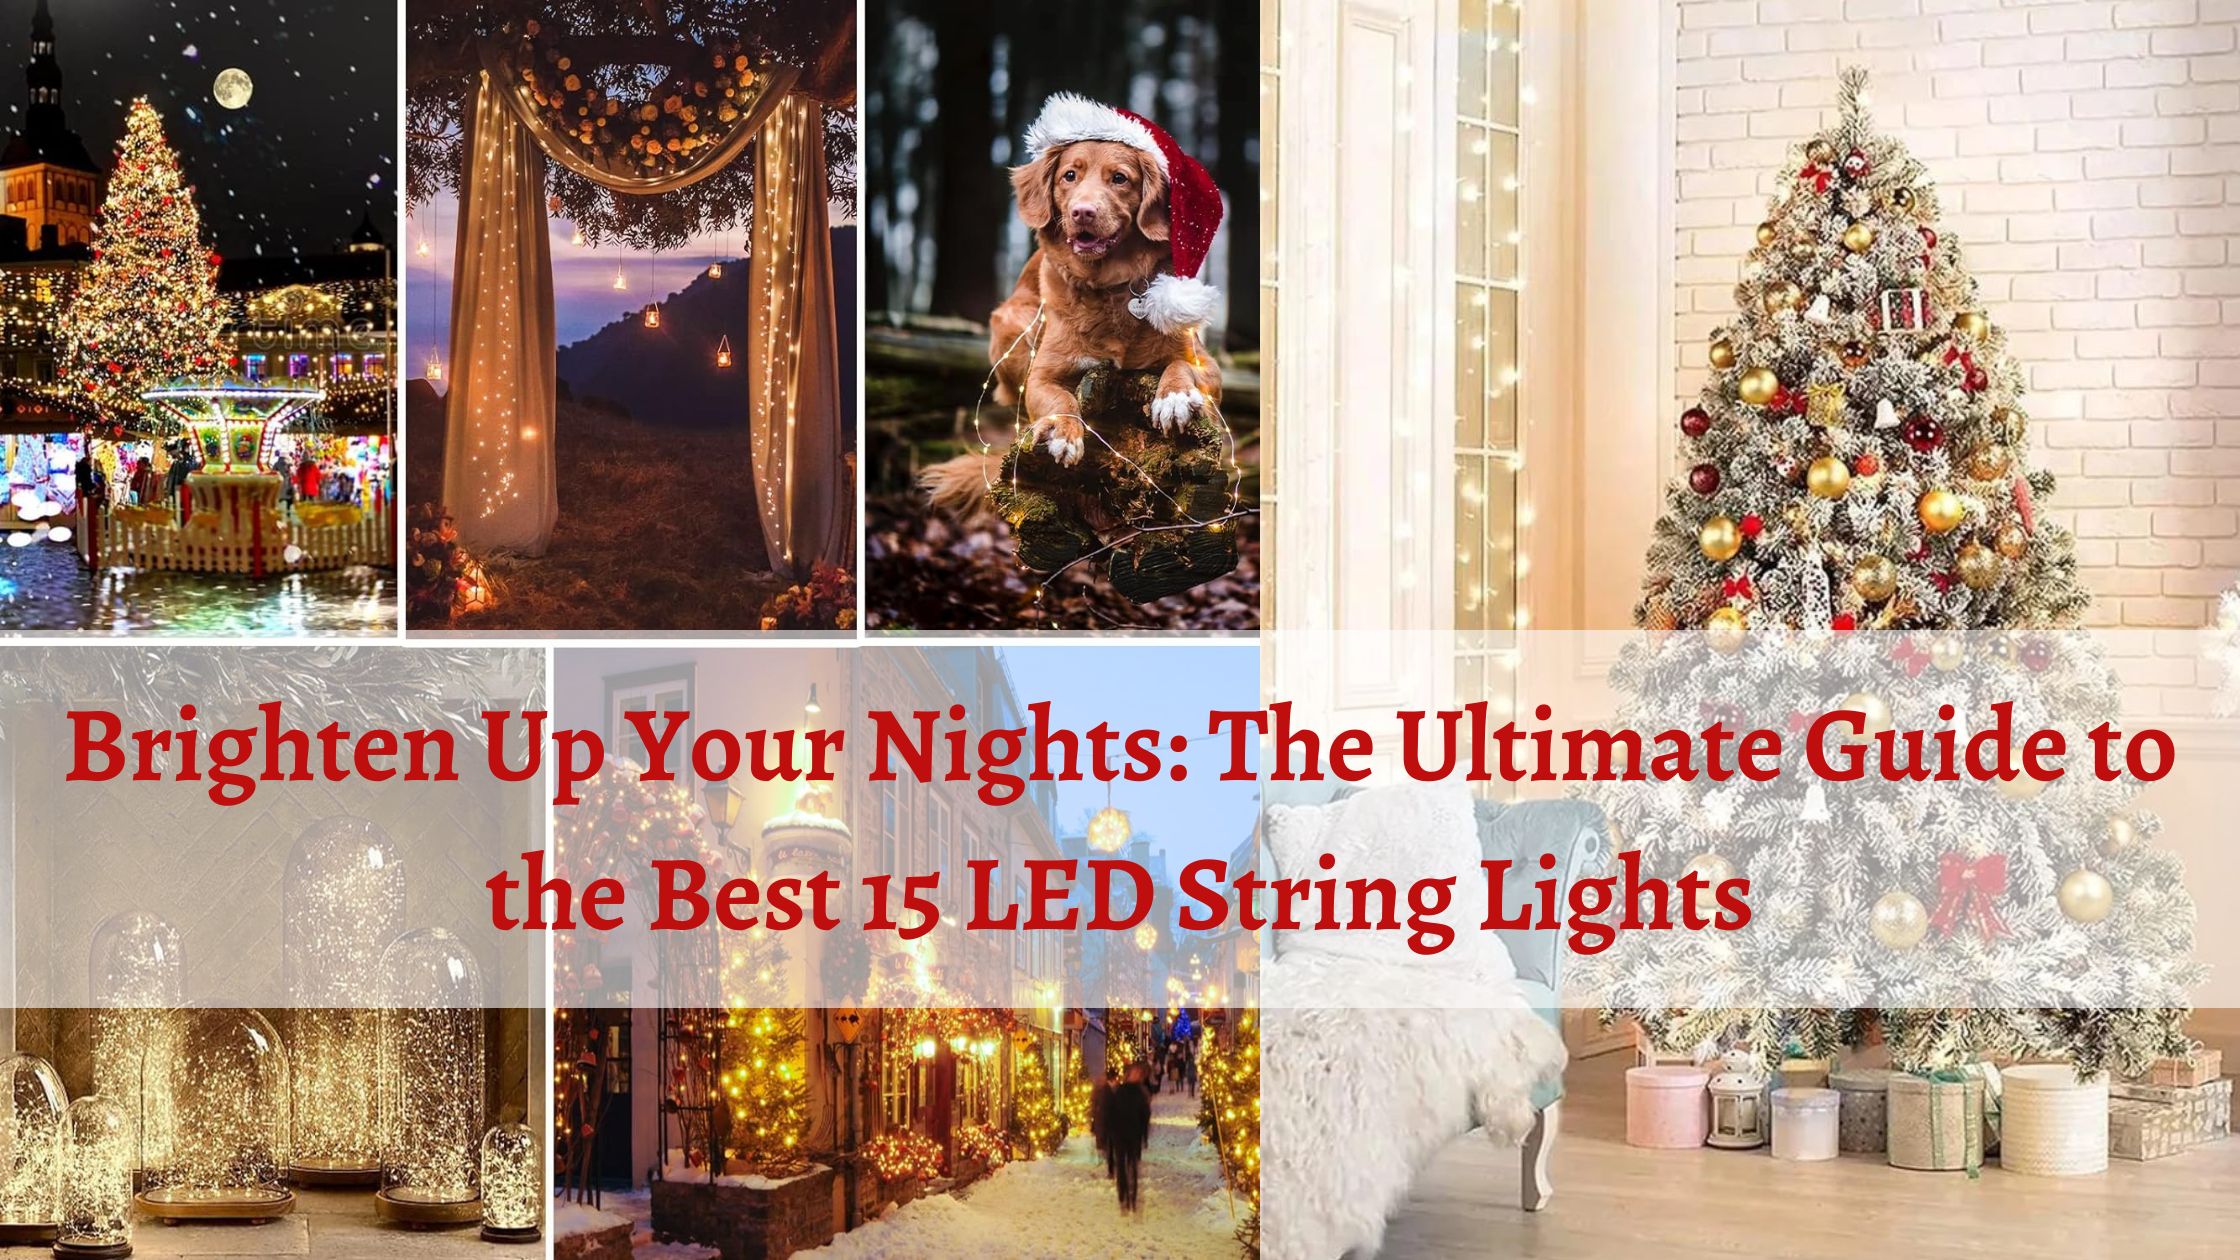 You are currently viewing Brighten Up Your Nights: The Ultimate Guide to the Best 15 LED String Lights